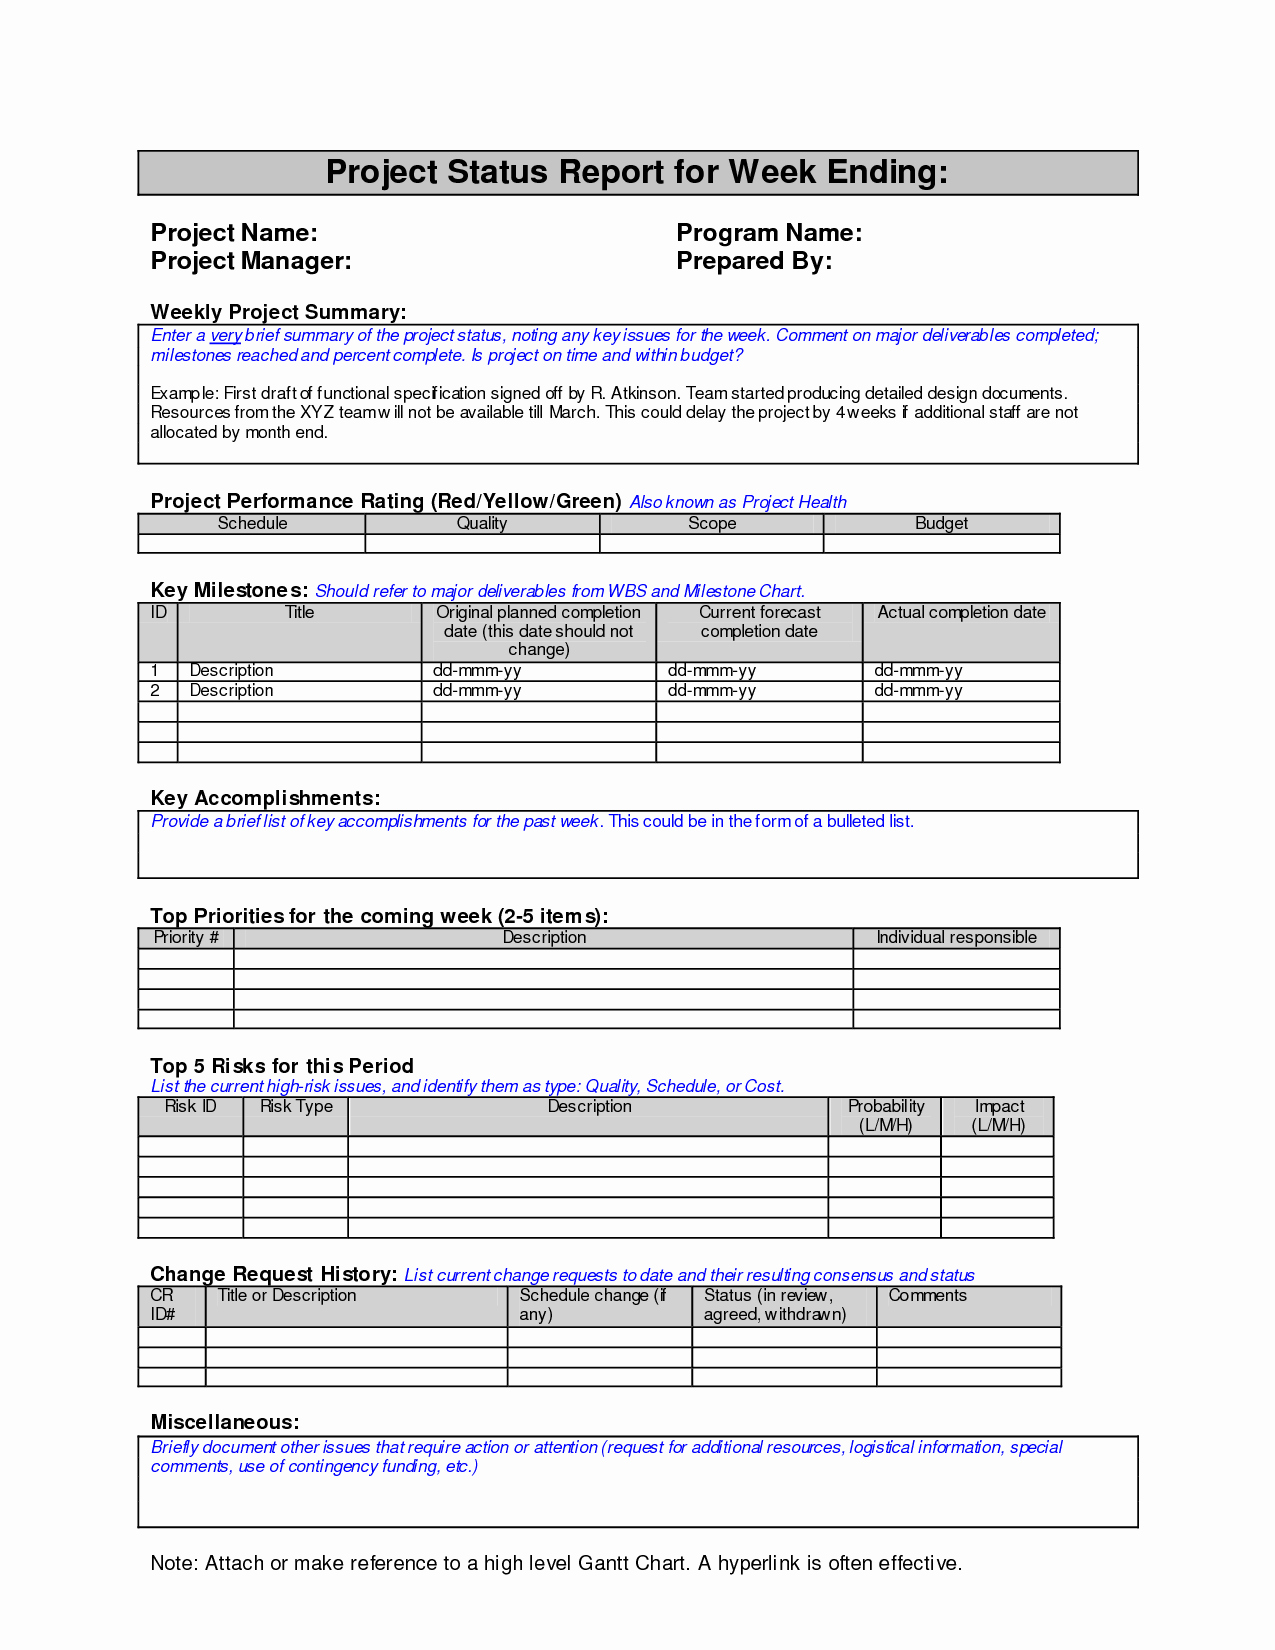 Weekly Progress Report Template Lovely Weekly Project Status Report Sample Google Search